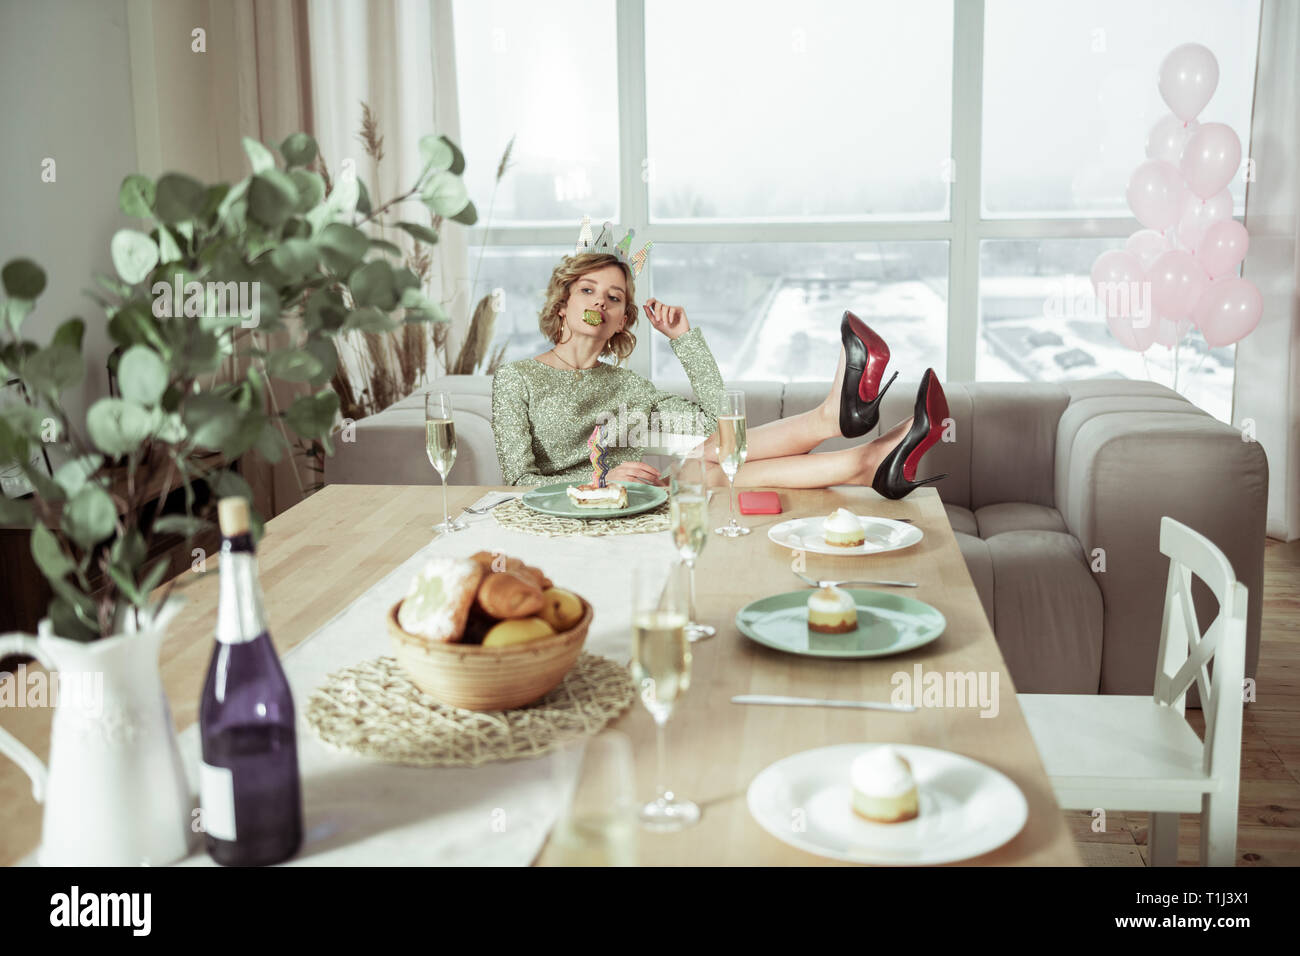 Birthday woman having no friends at her apartment for the party Stock Photo